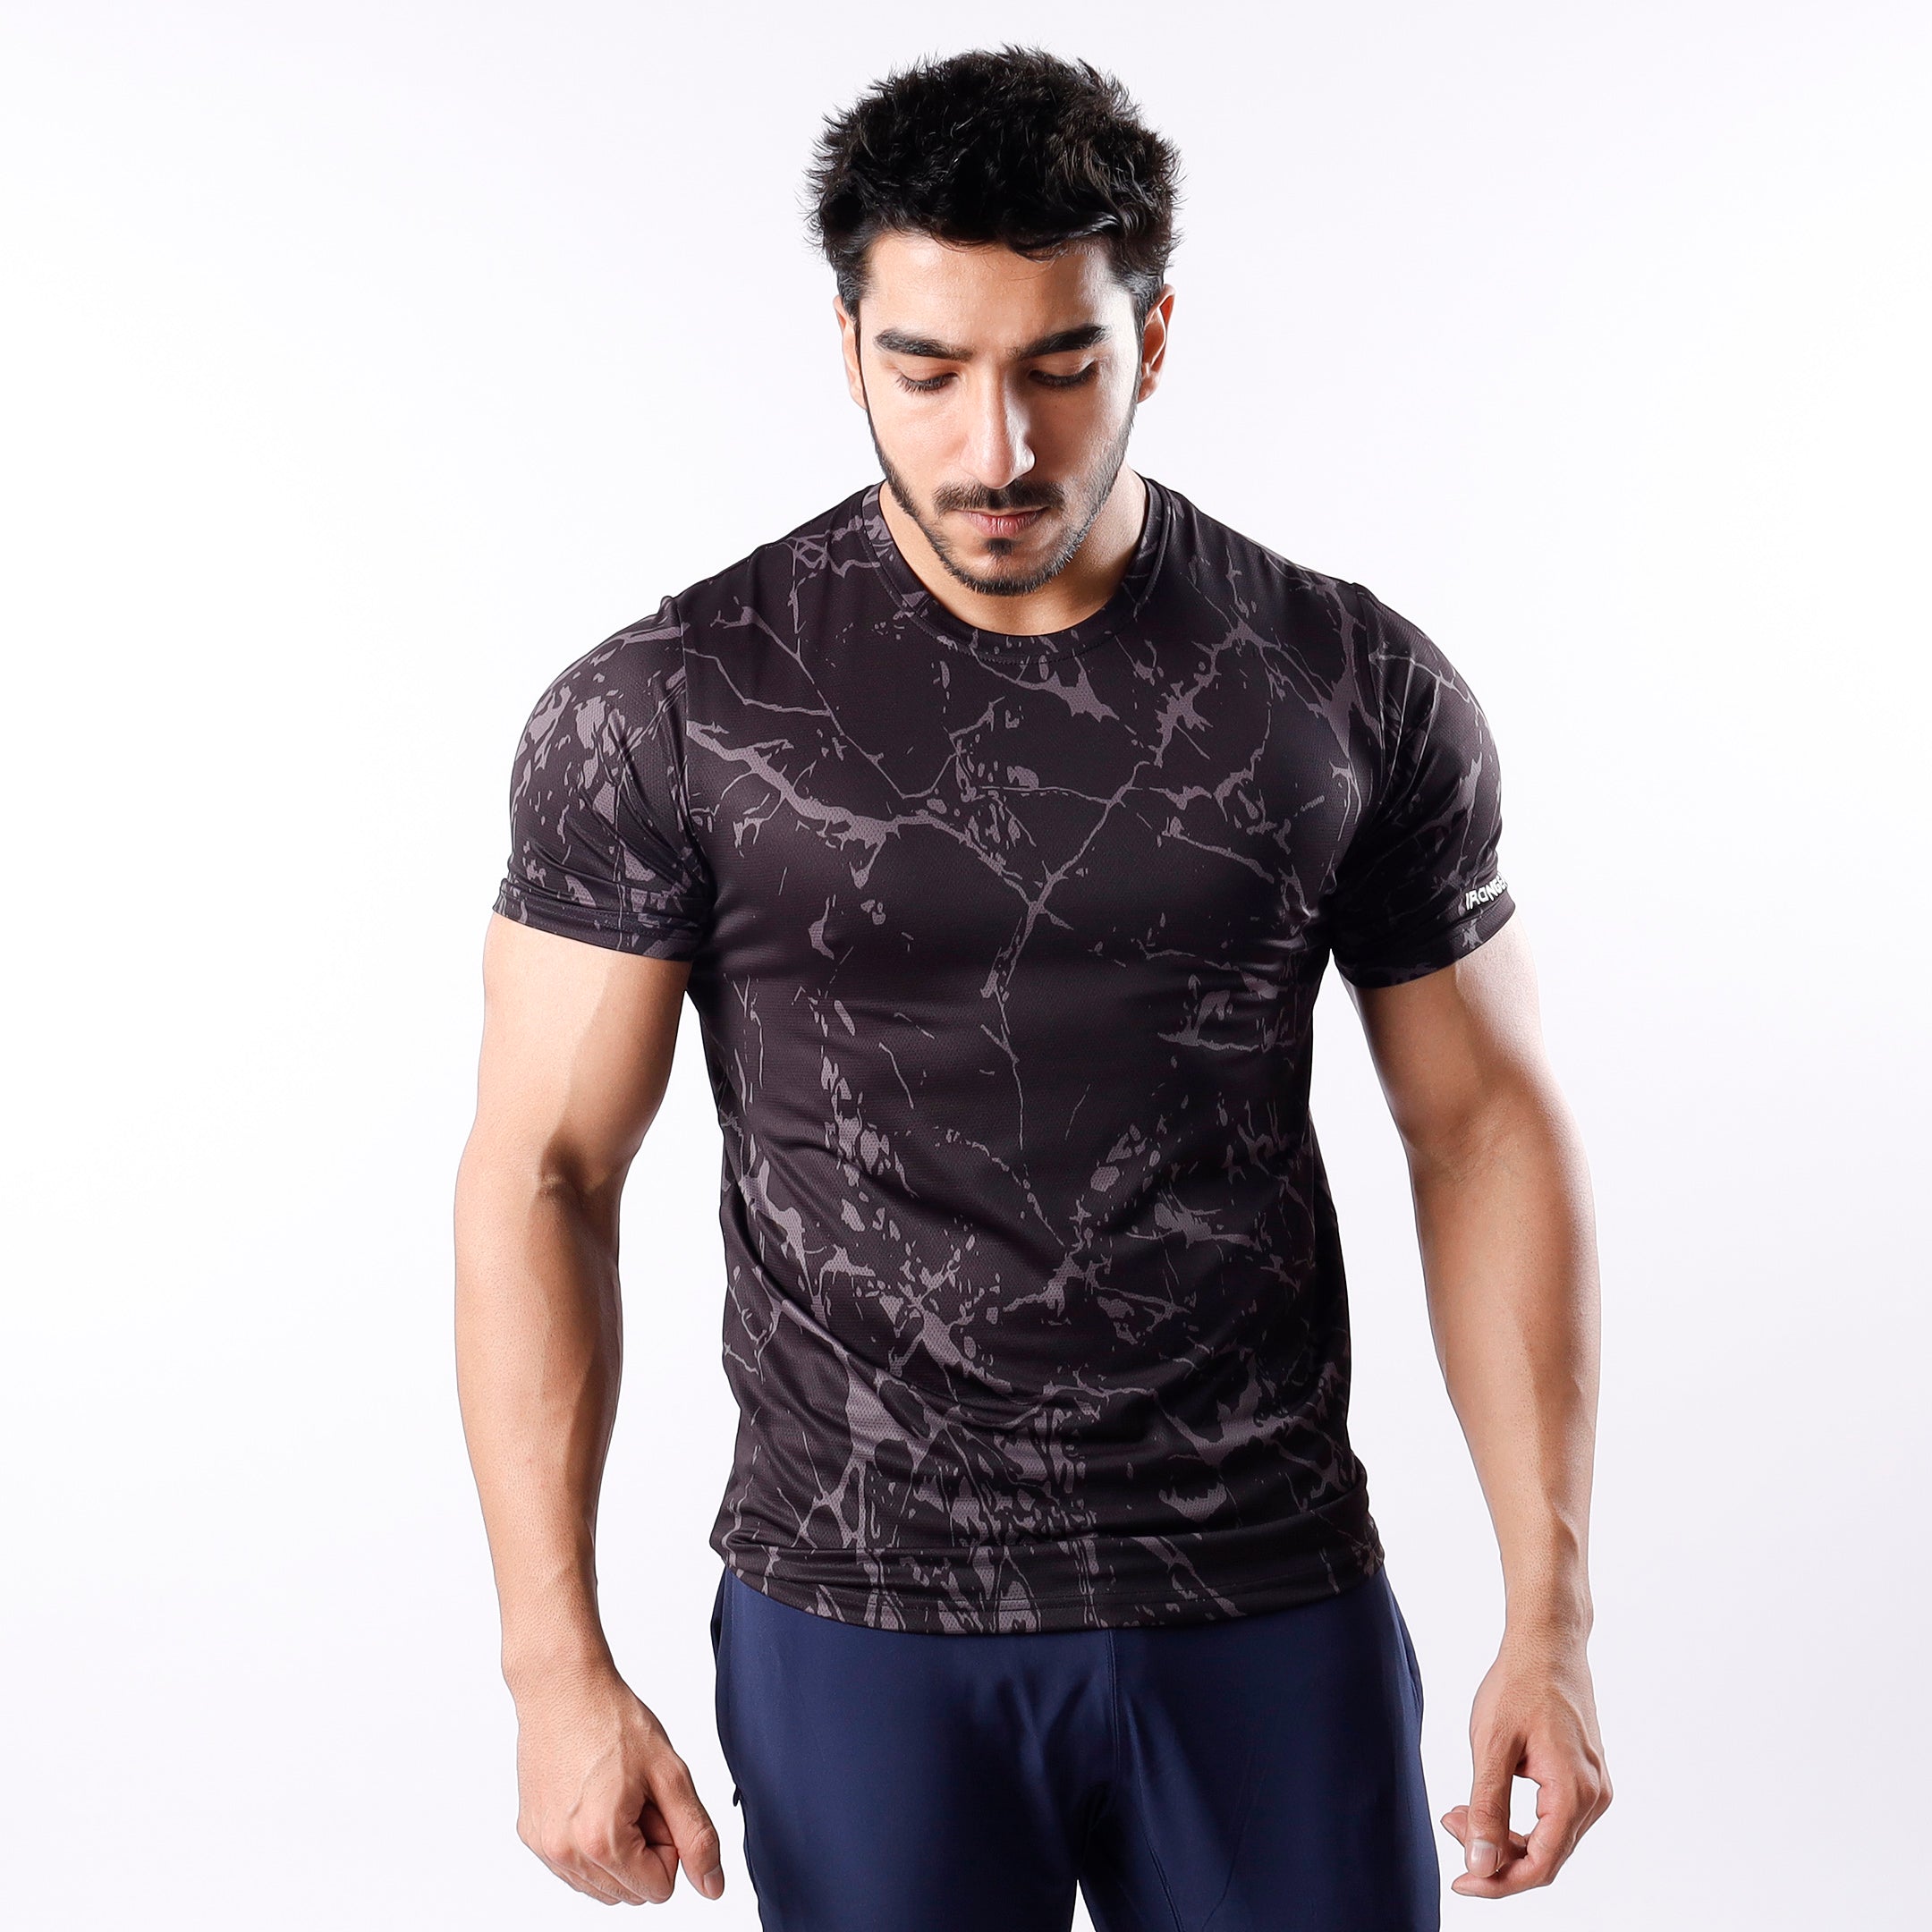 Muscle Shirt Black Marble